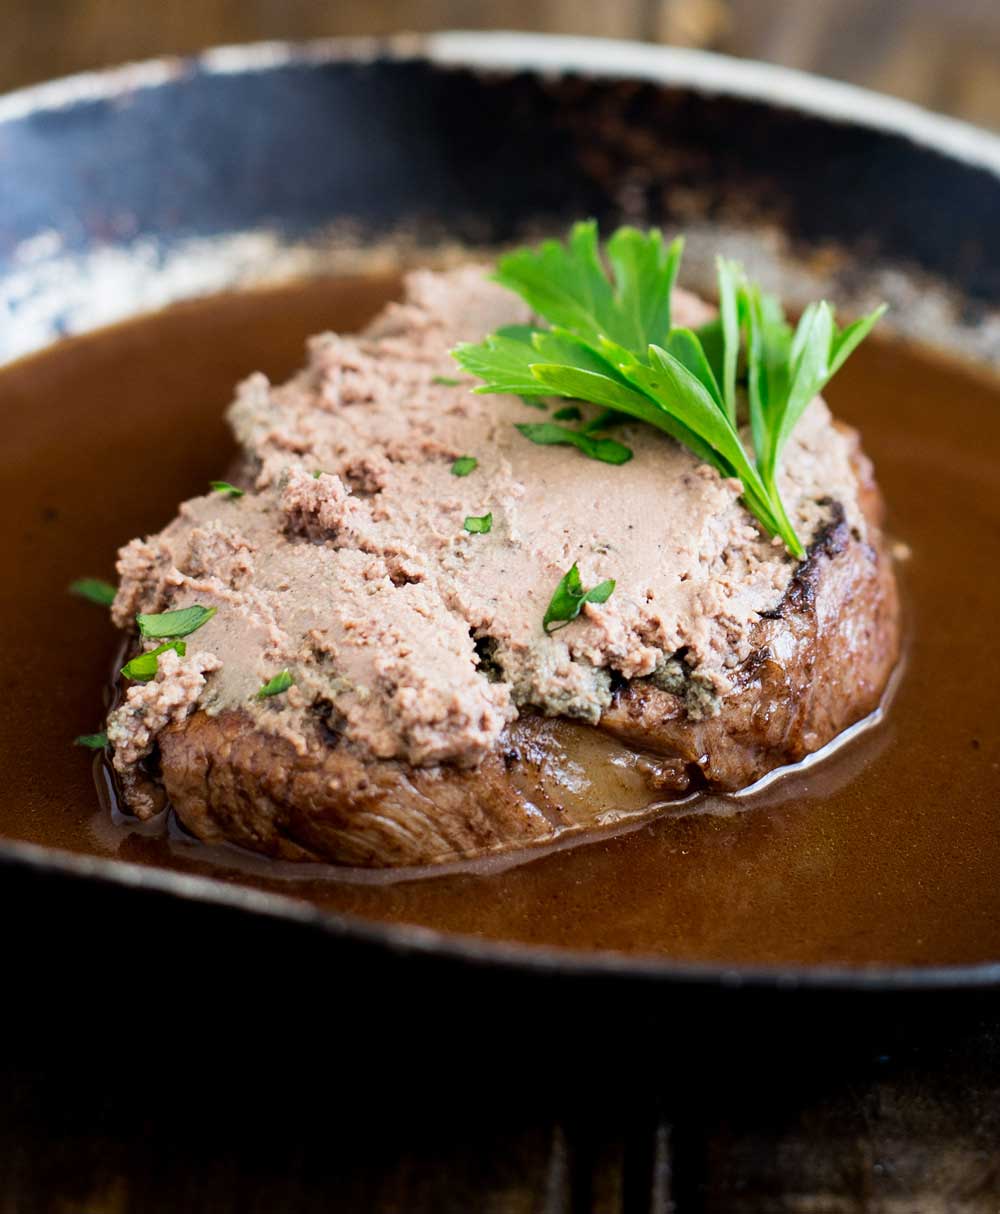 Tournedos Rossini, an elegant dinner party idea. Perfectly cooked fillet steak, topped with rich pâté served with a delicious red wine jus. What could be better? Delicious, easy to make and looks dead posh ;-)